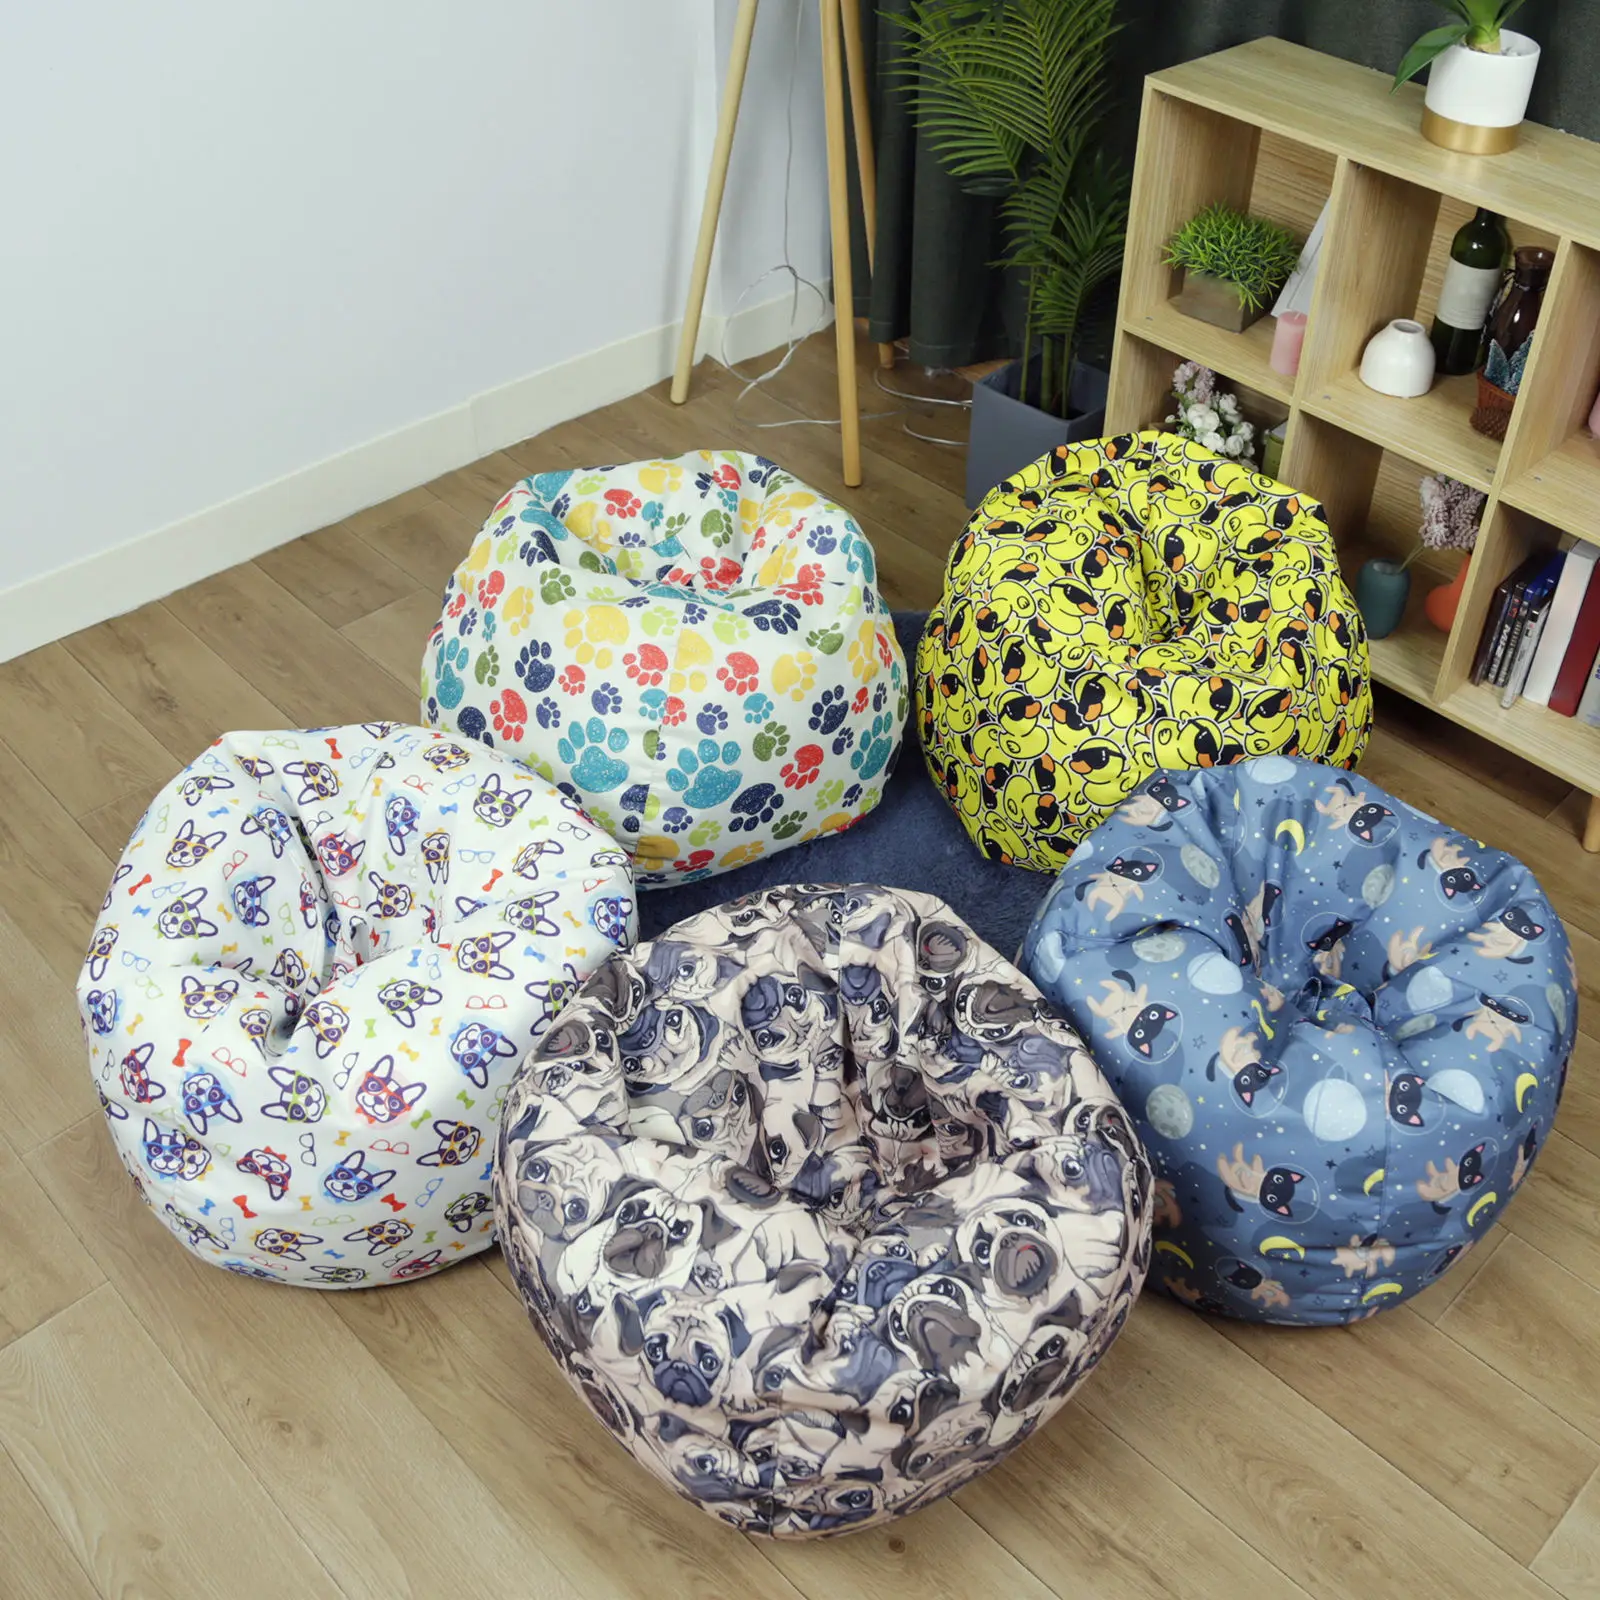 Linen Bean Bag Chair Cover 12 Chair And Sofa Covers